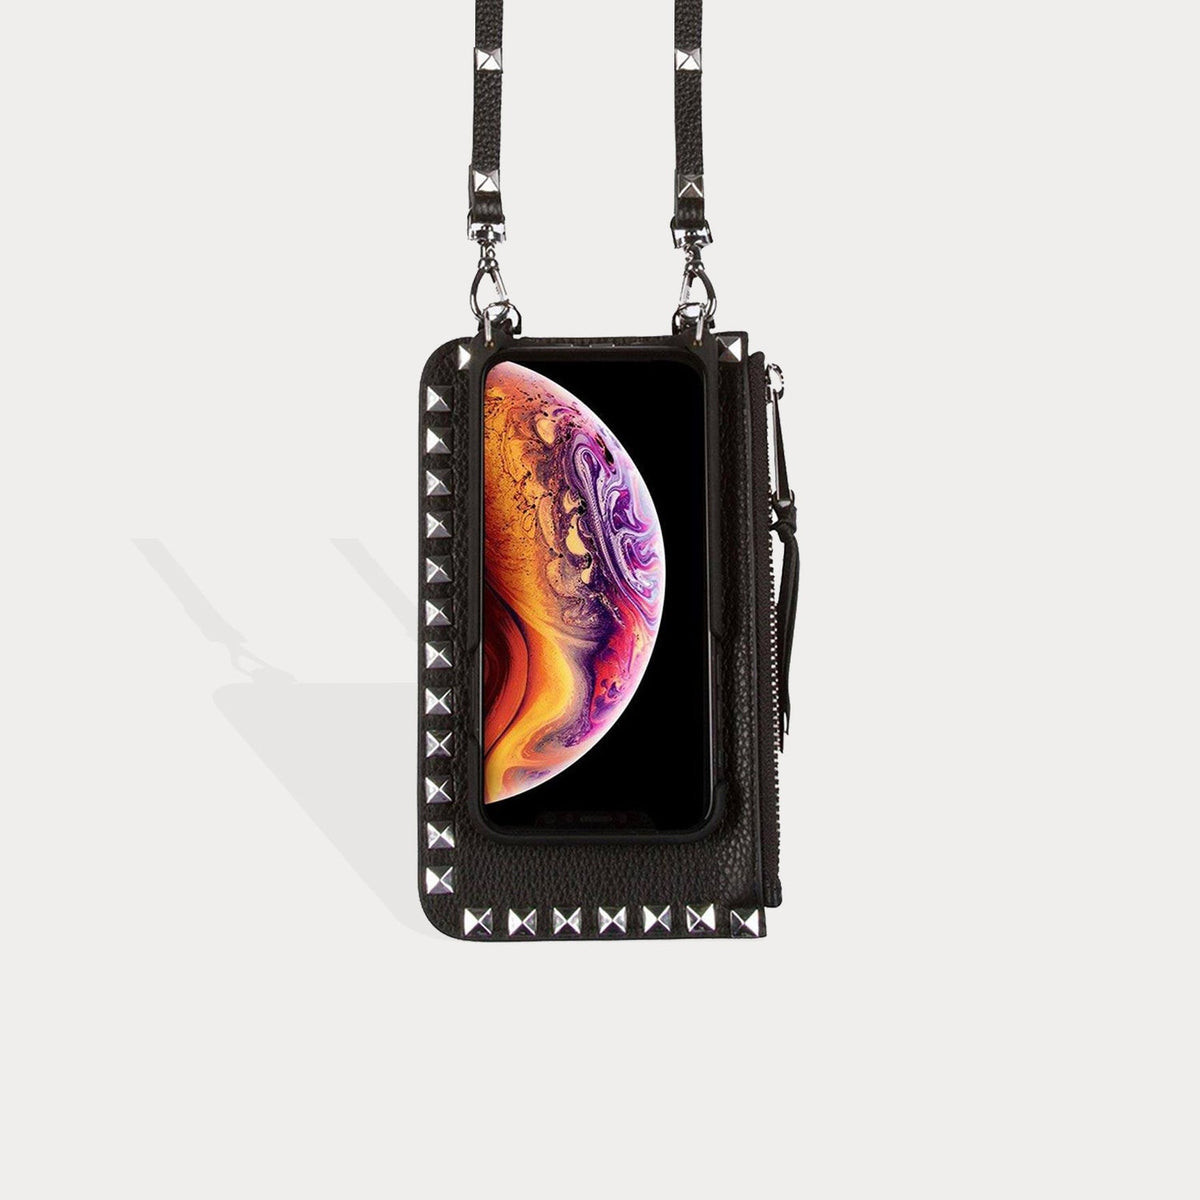 Bandolier Sarah Crossbody Phone Case and Wallet - Black Leather with Silver Detail - for iPhone X/XS